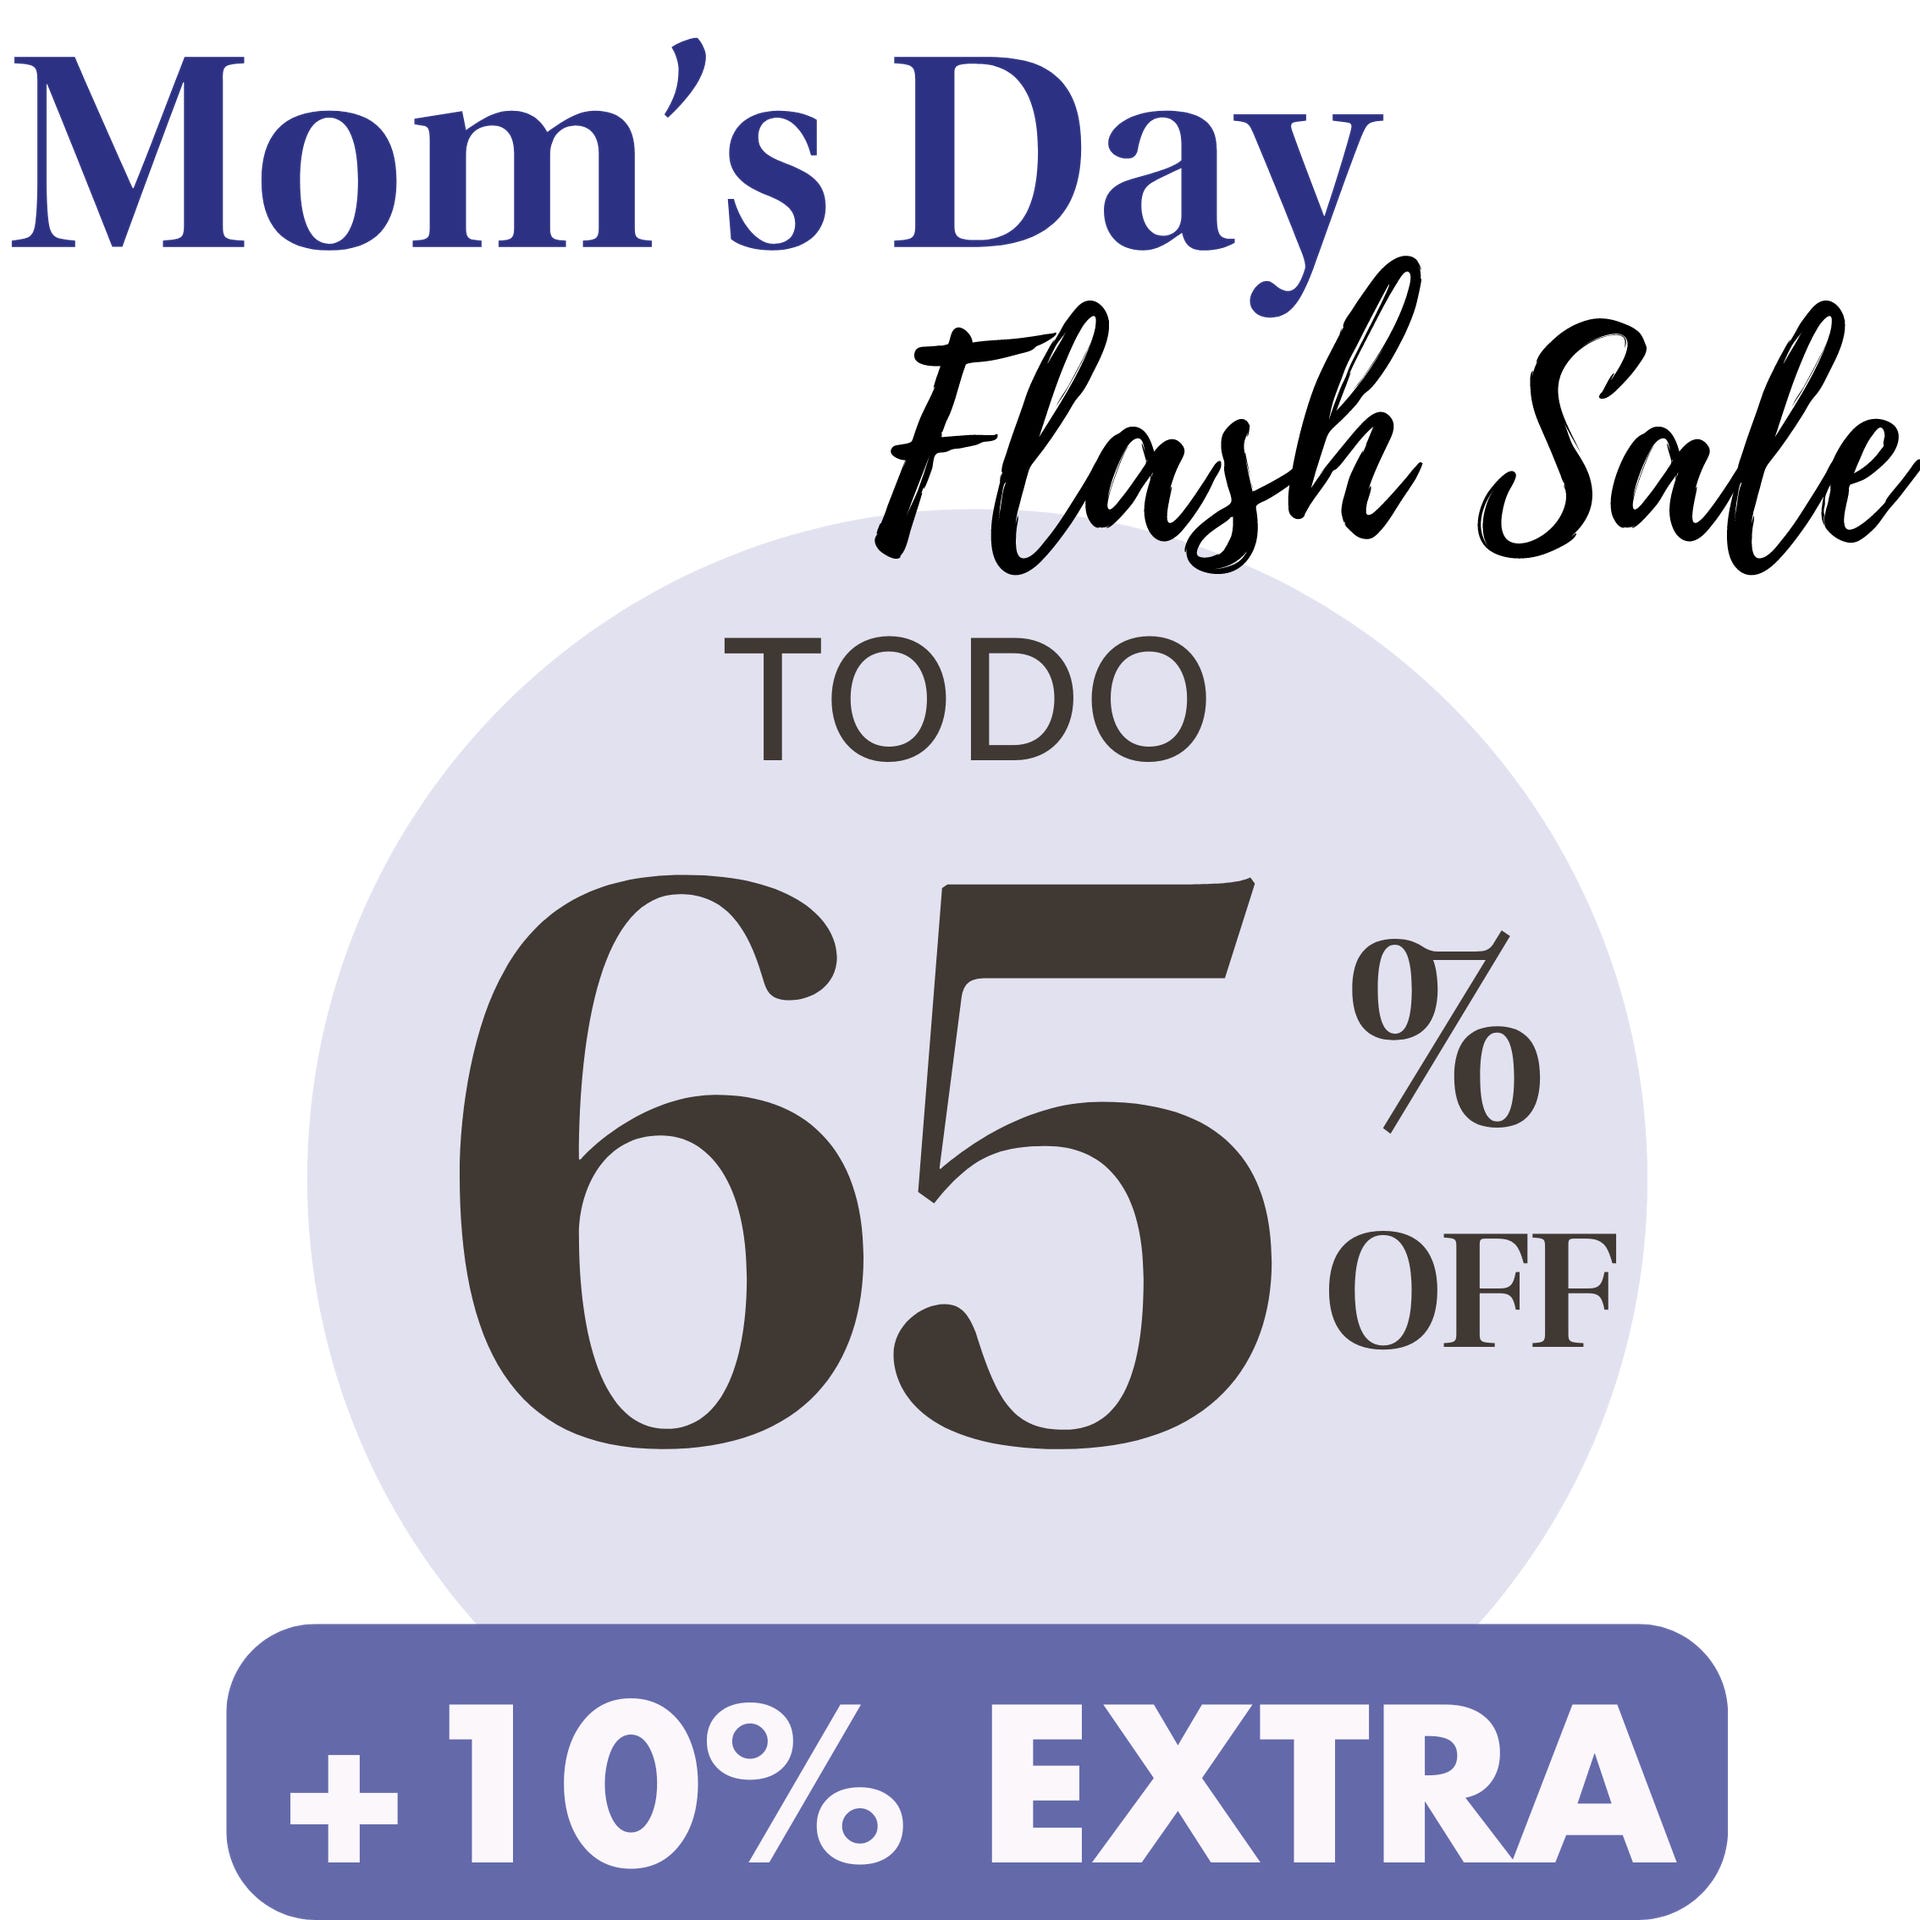 TODO 65% OFF FLASH SALE MOMS DAY